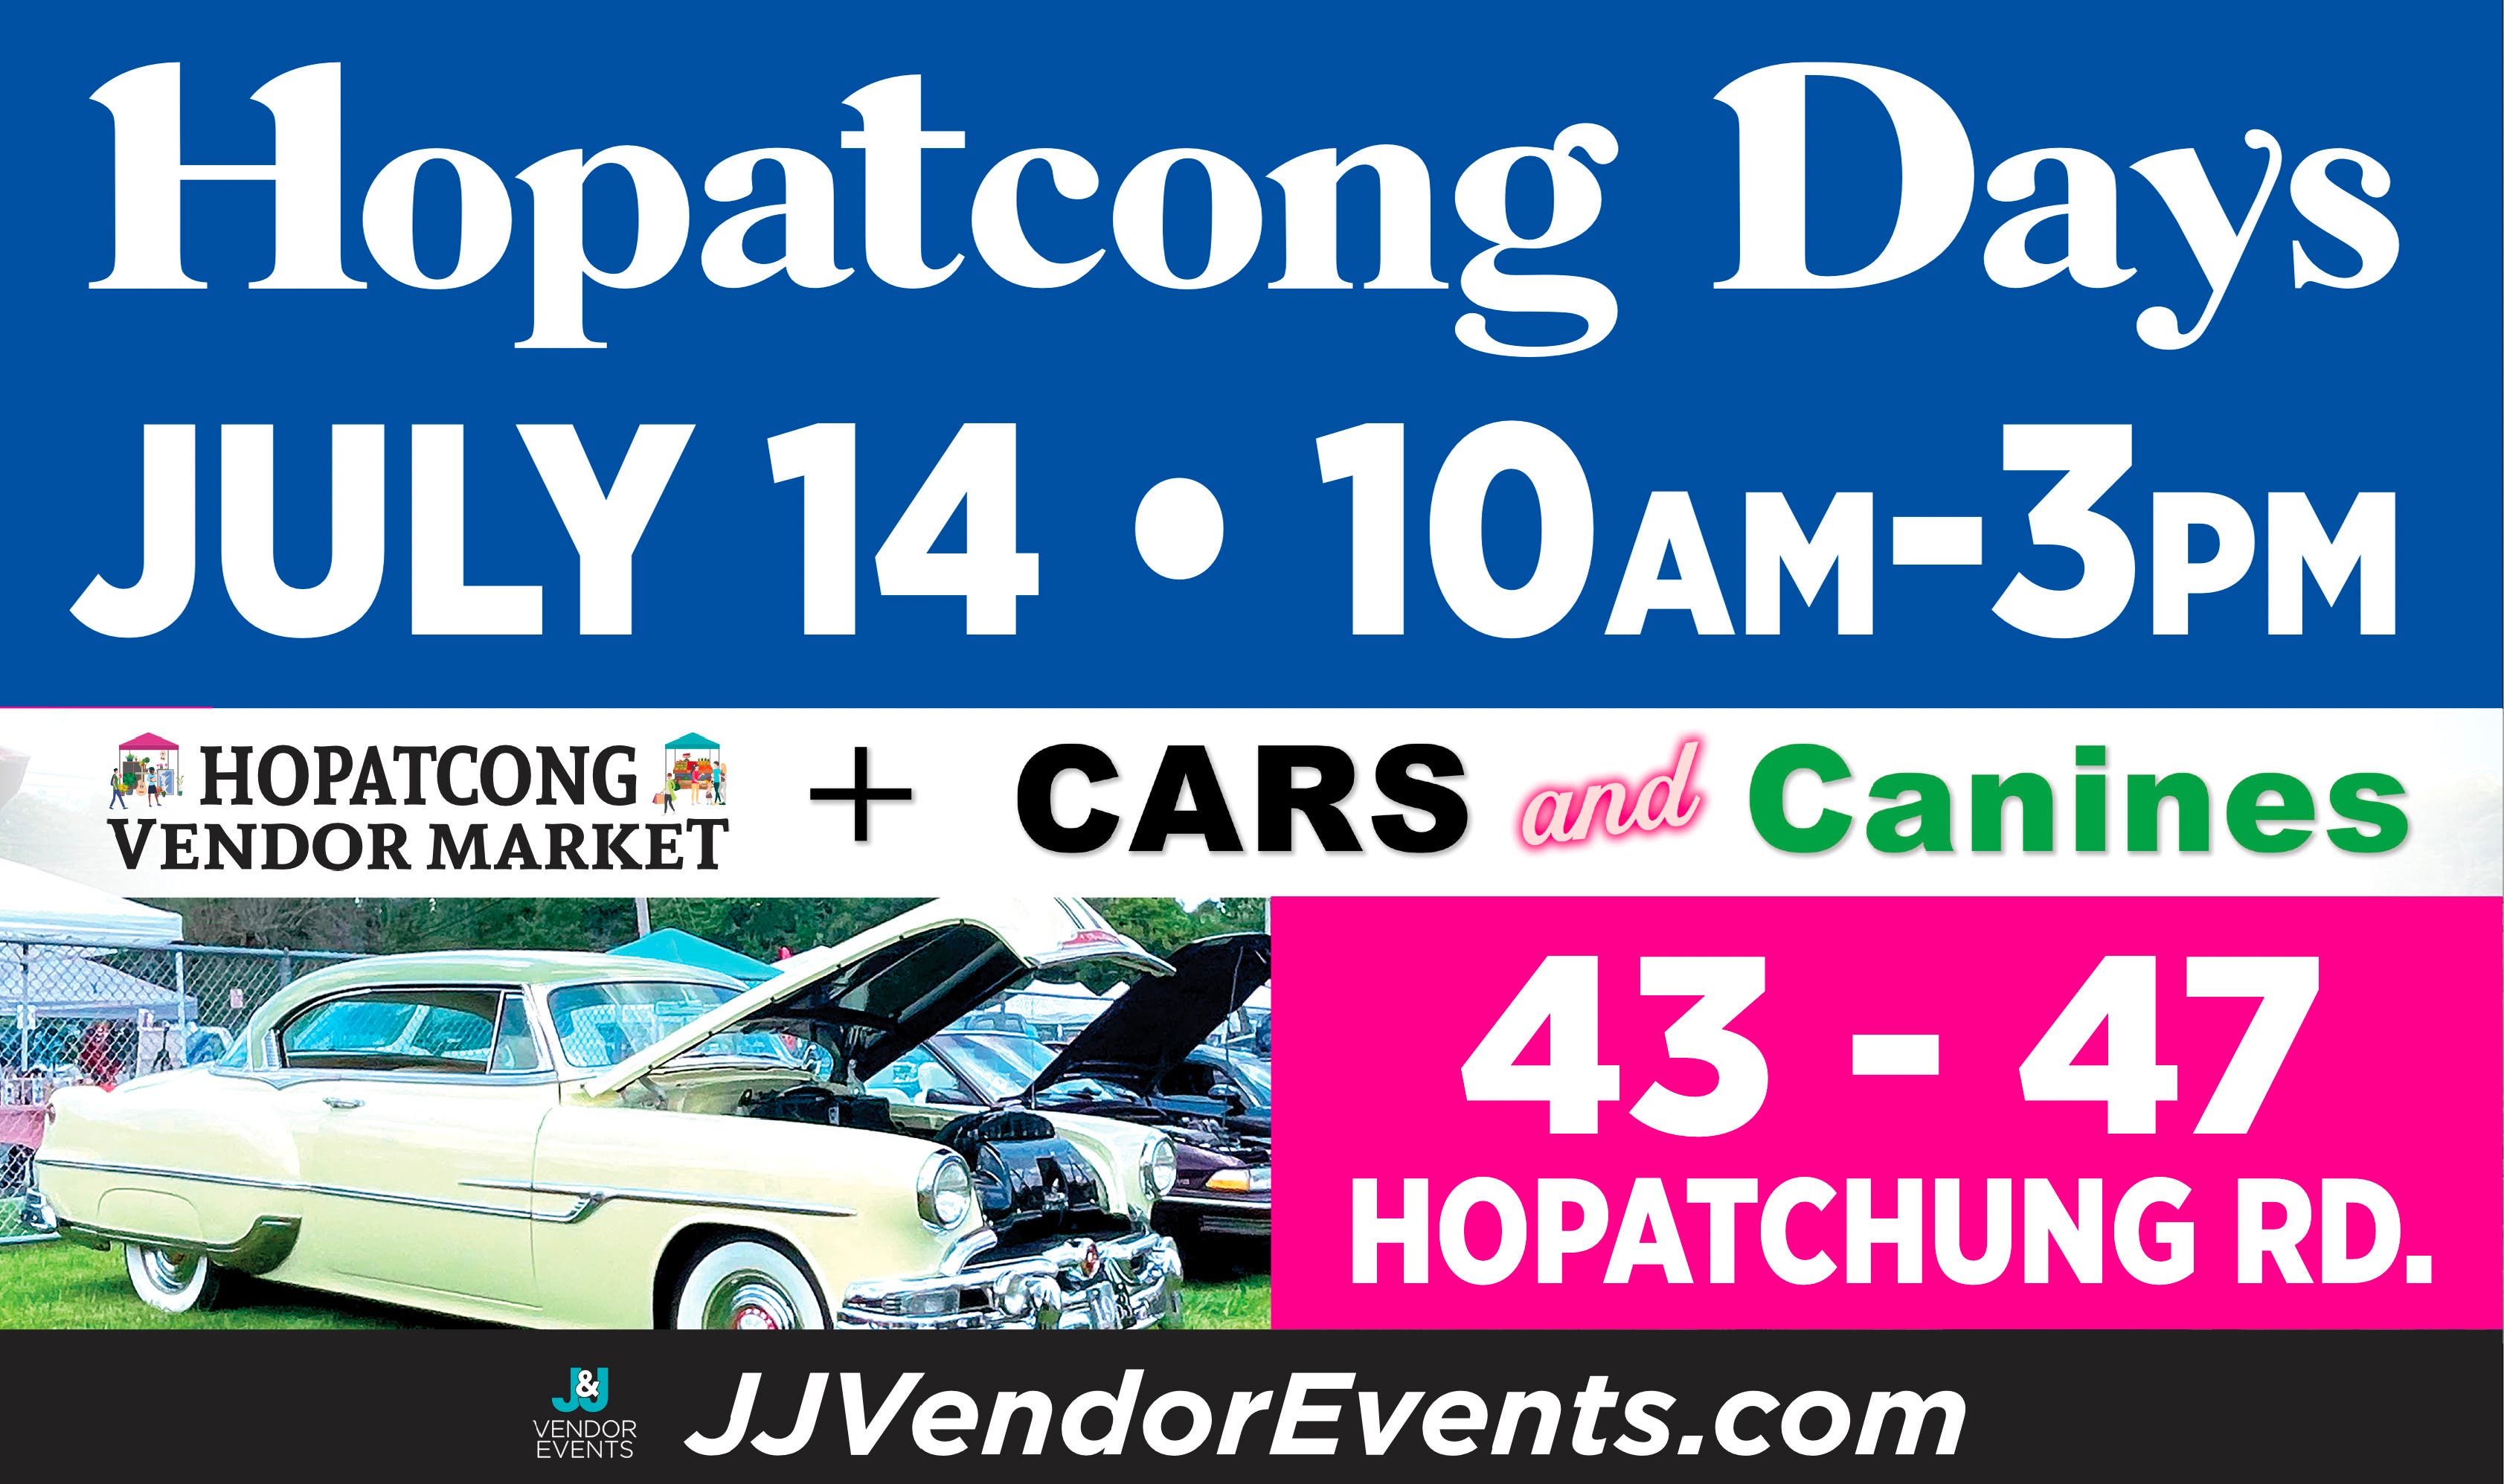 Hopatcong Days - Vendor Market + Cars & Canines (Hosted by Dog Pound Cruisers)